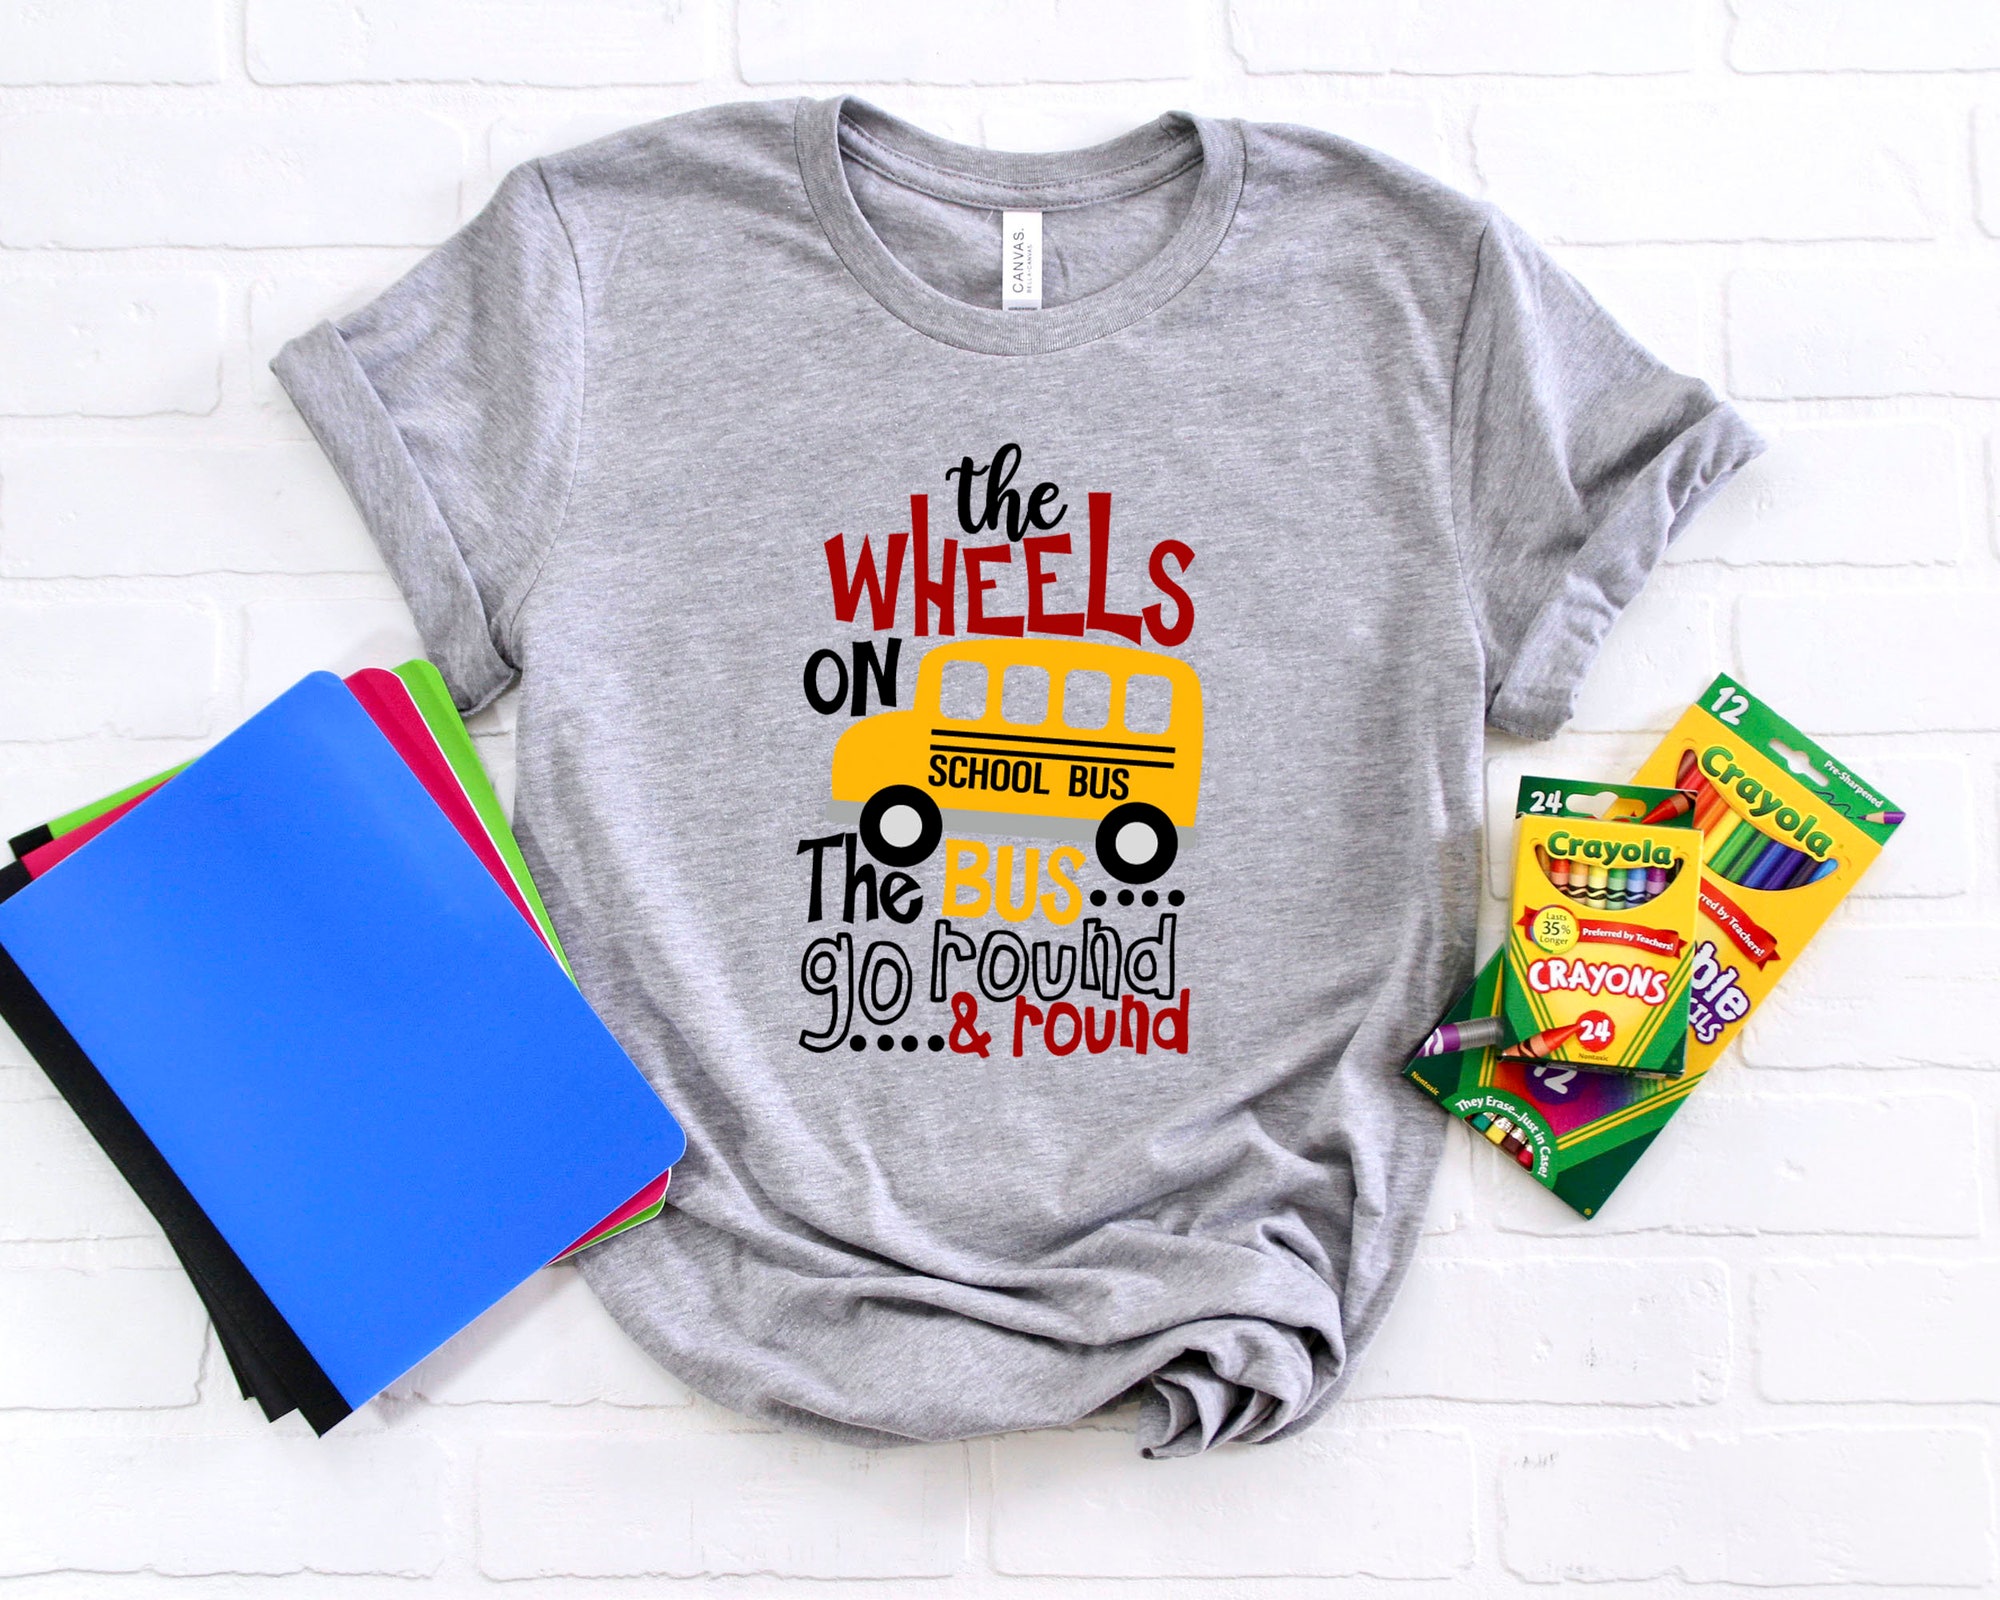 The WHEELS On The BUS shirt, go back to school shirt,School bus shirt, school kids shirt